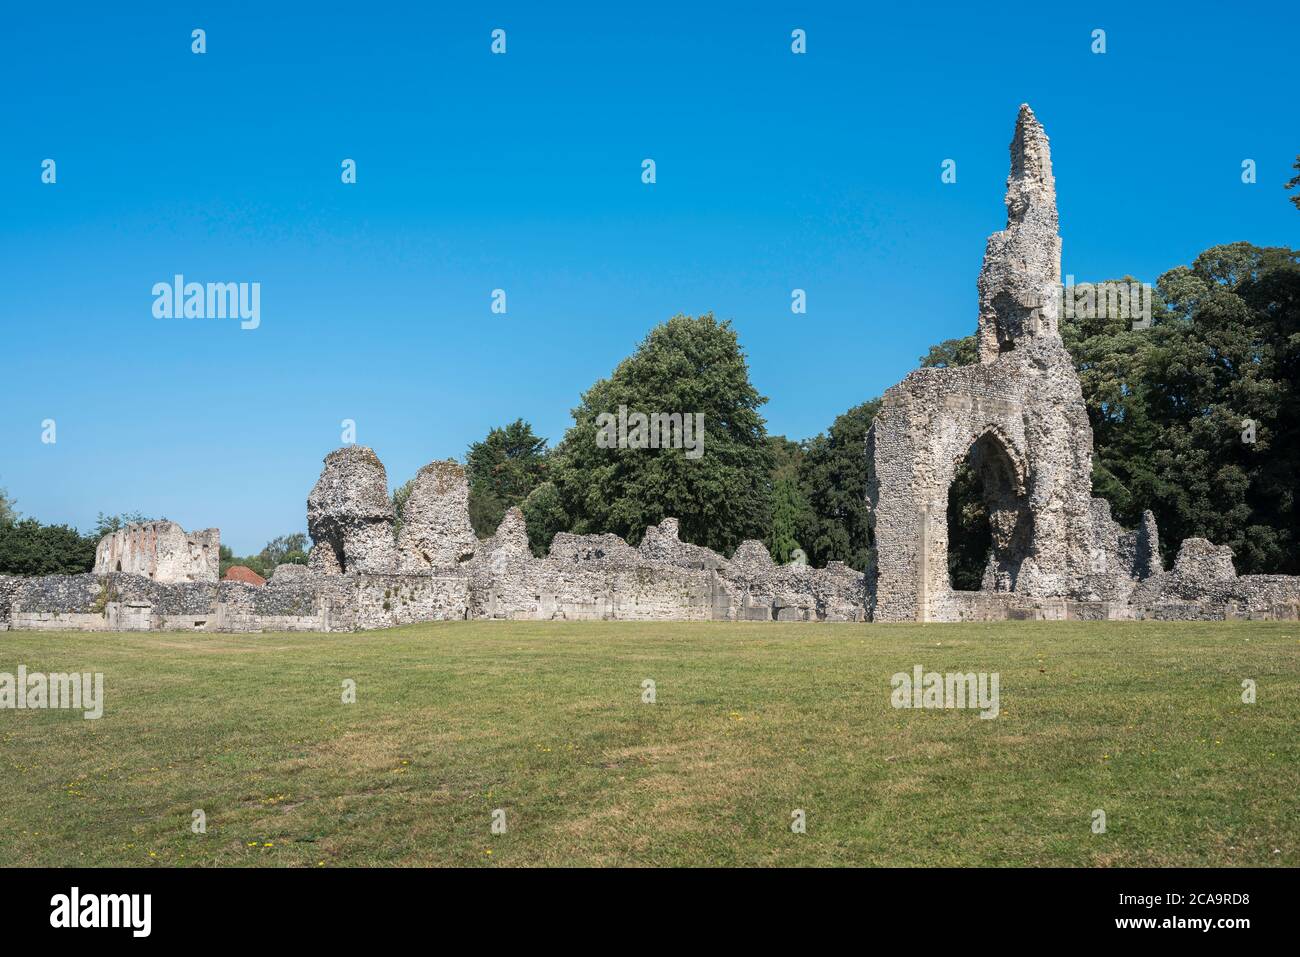 Thetford Priory Norfolk, view of the ruins of Thetford Priory, a